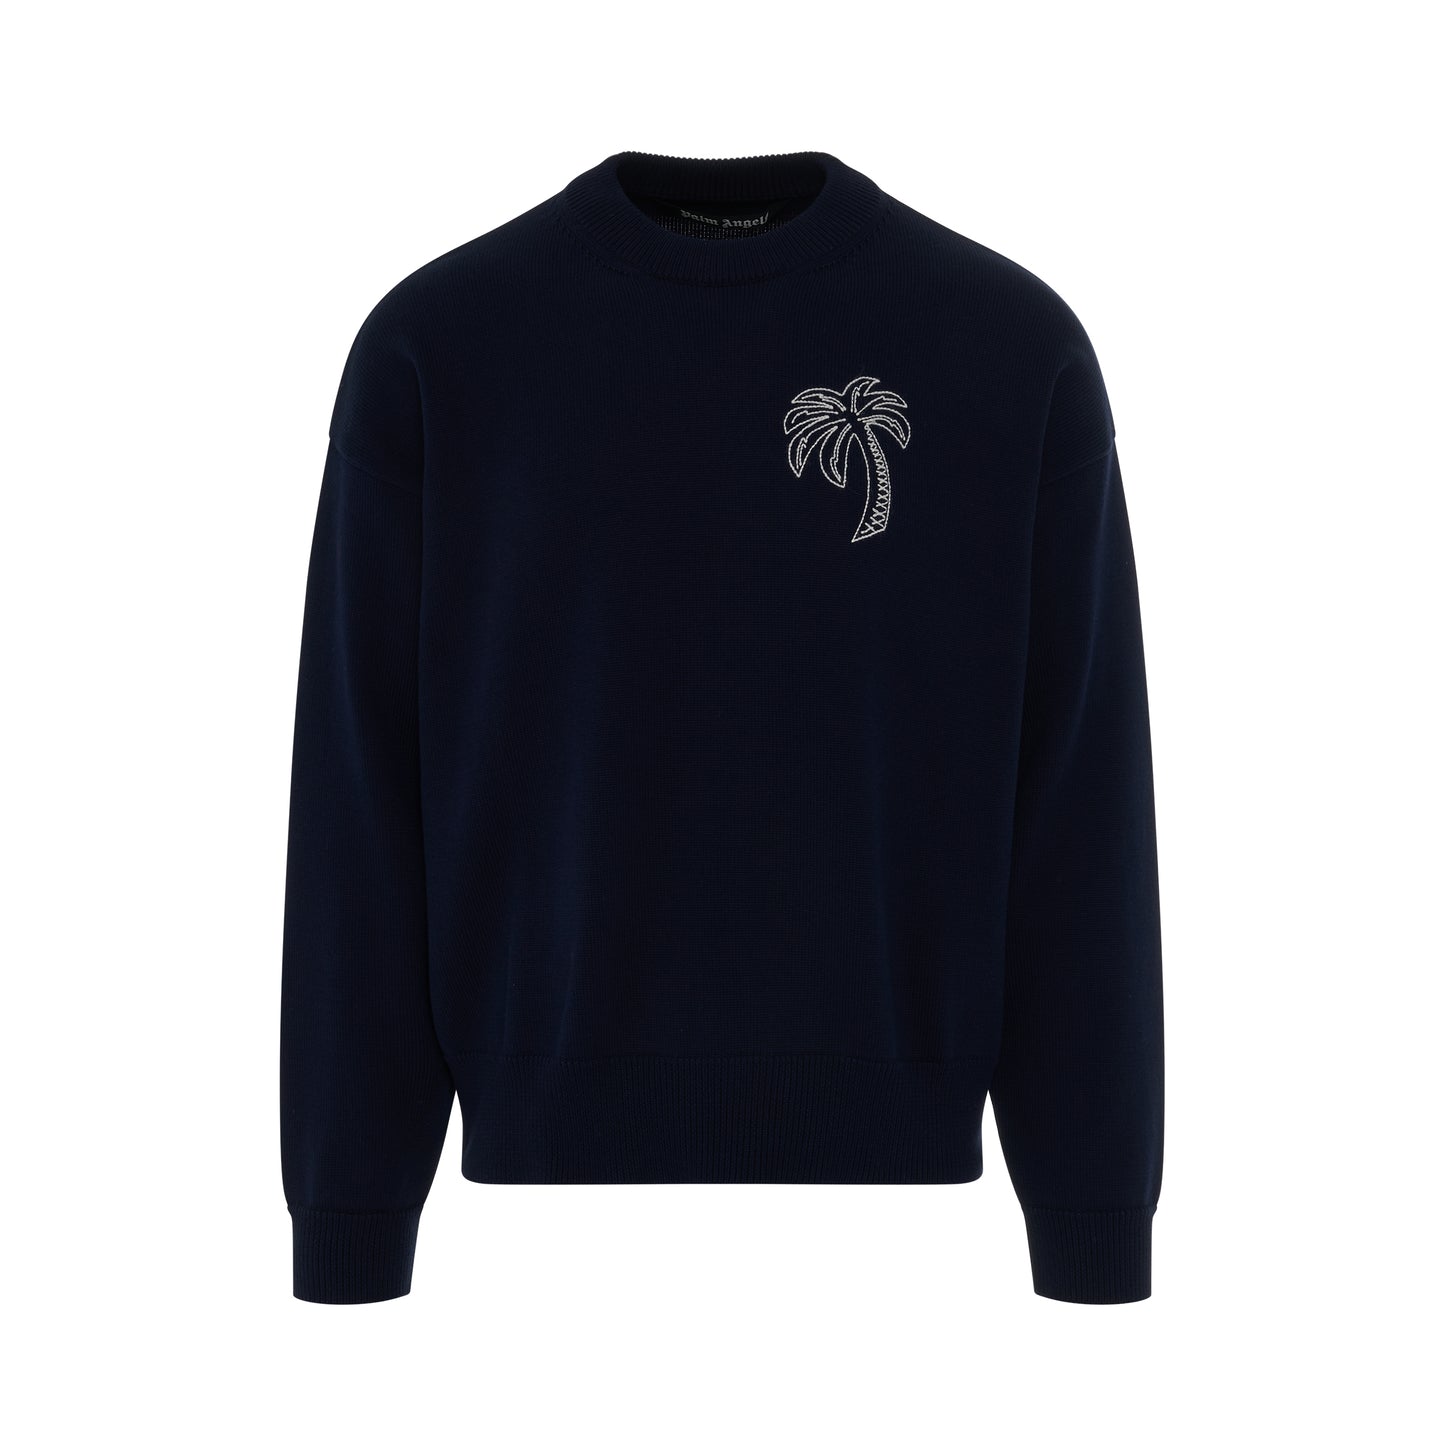 Embroidered Palm Sweater in Black/White